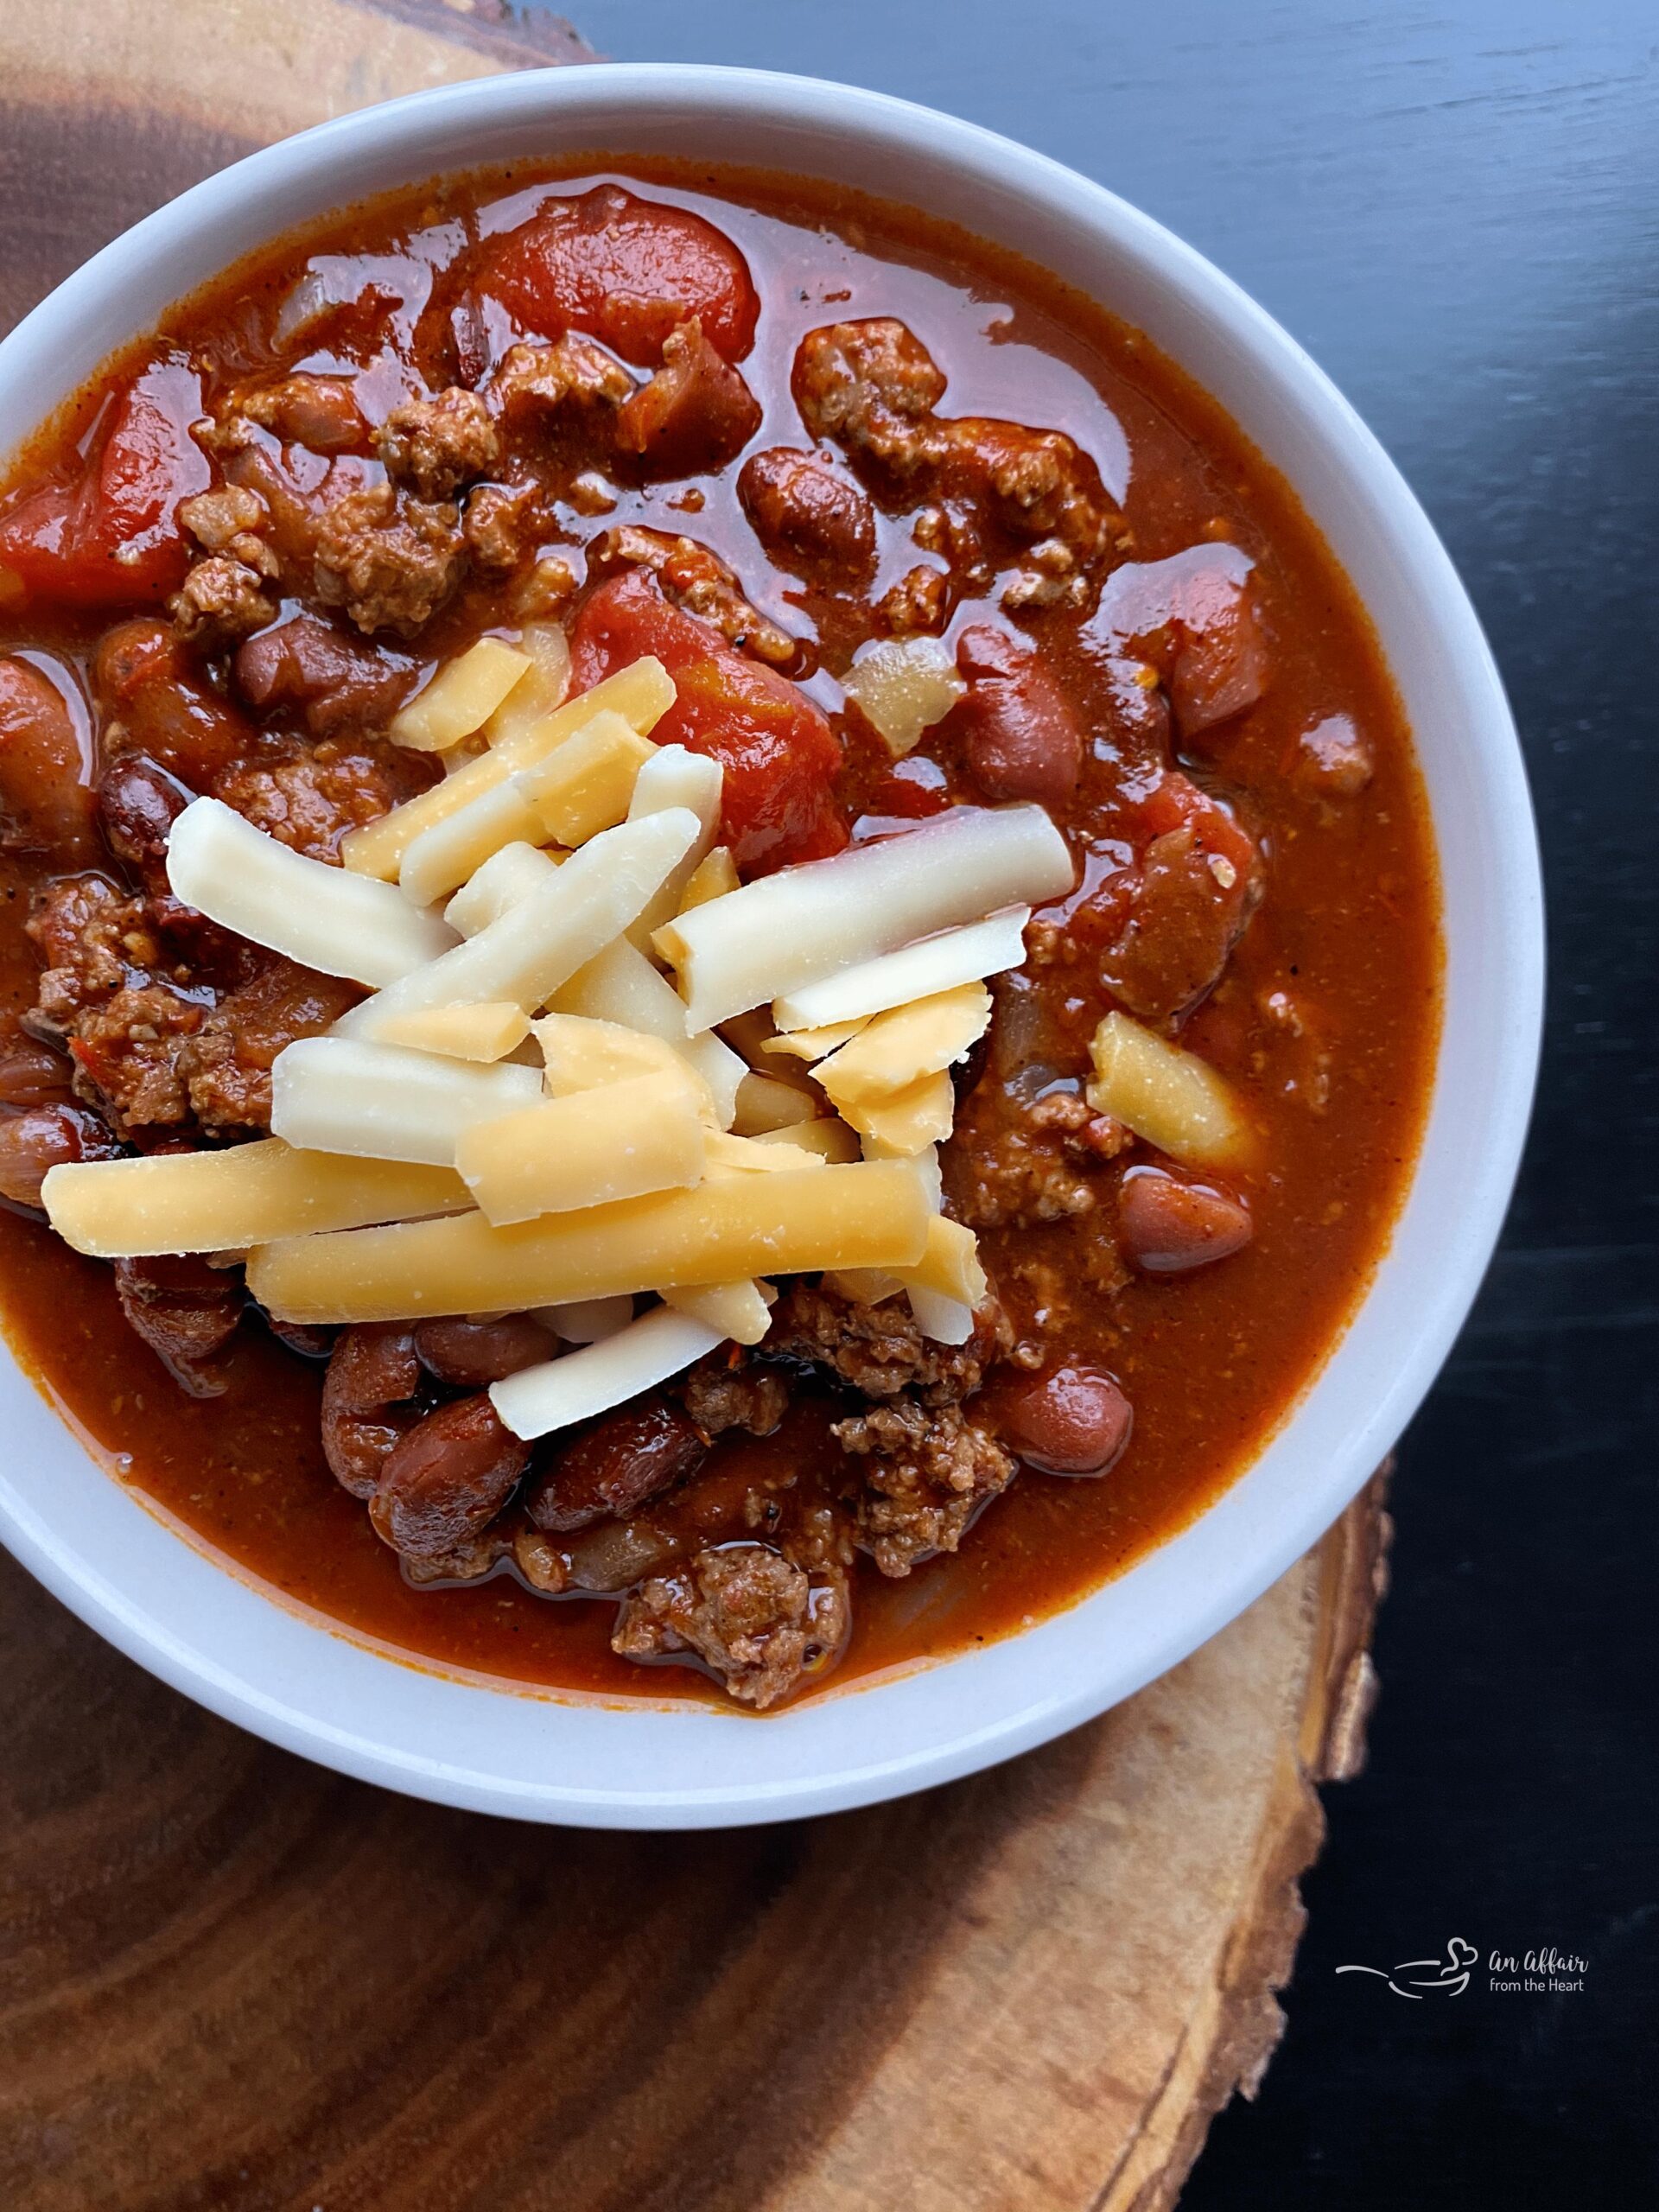  This chili will have your taste buds dancing with a blend of smoky and savory flavors.